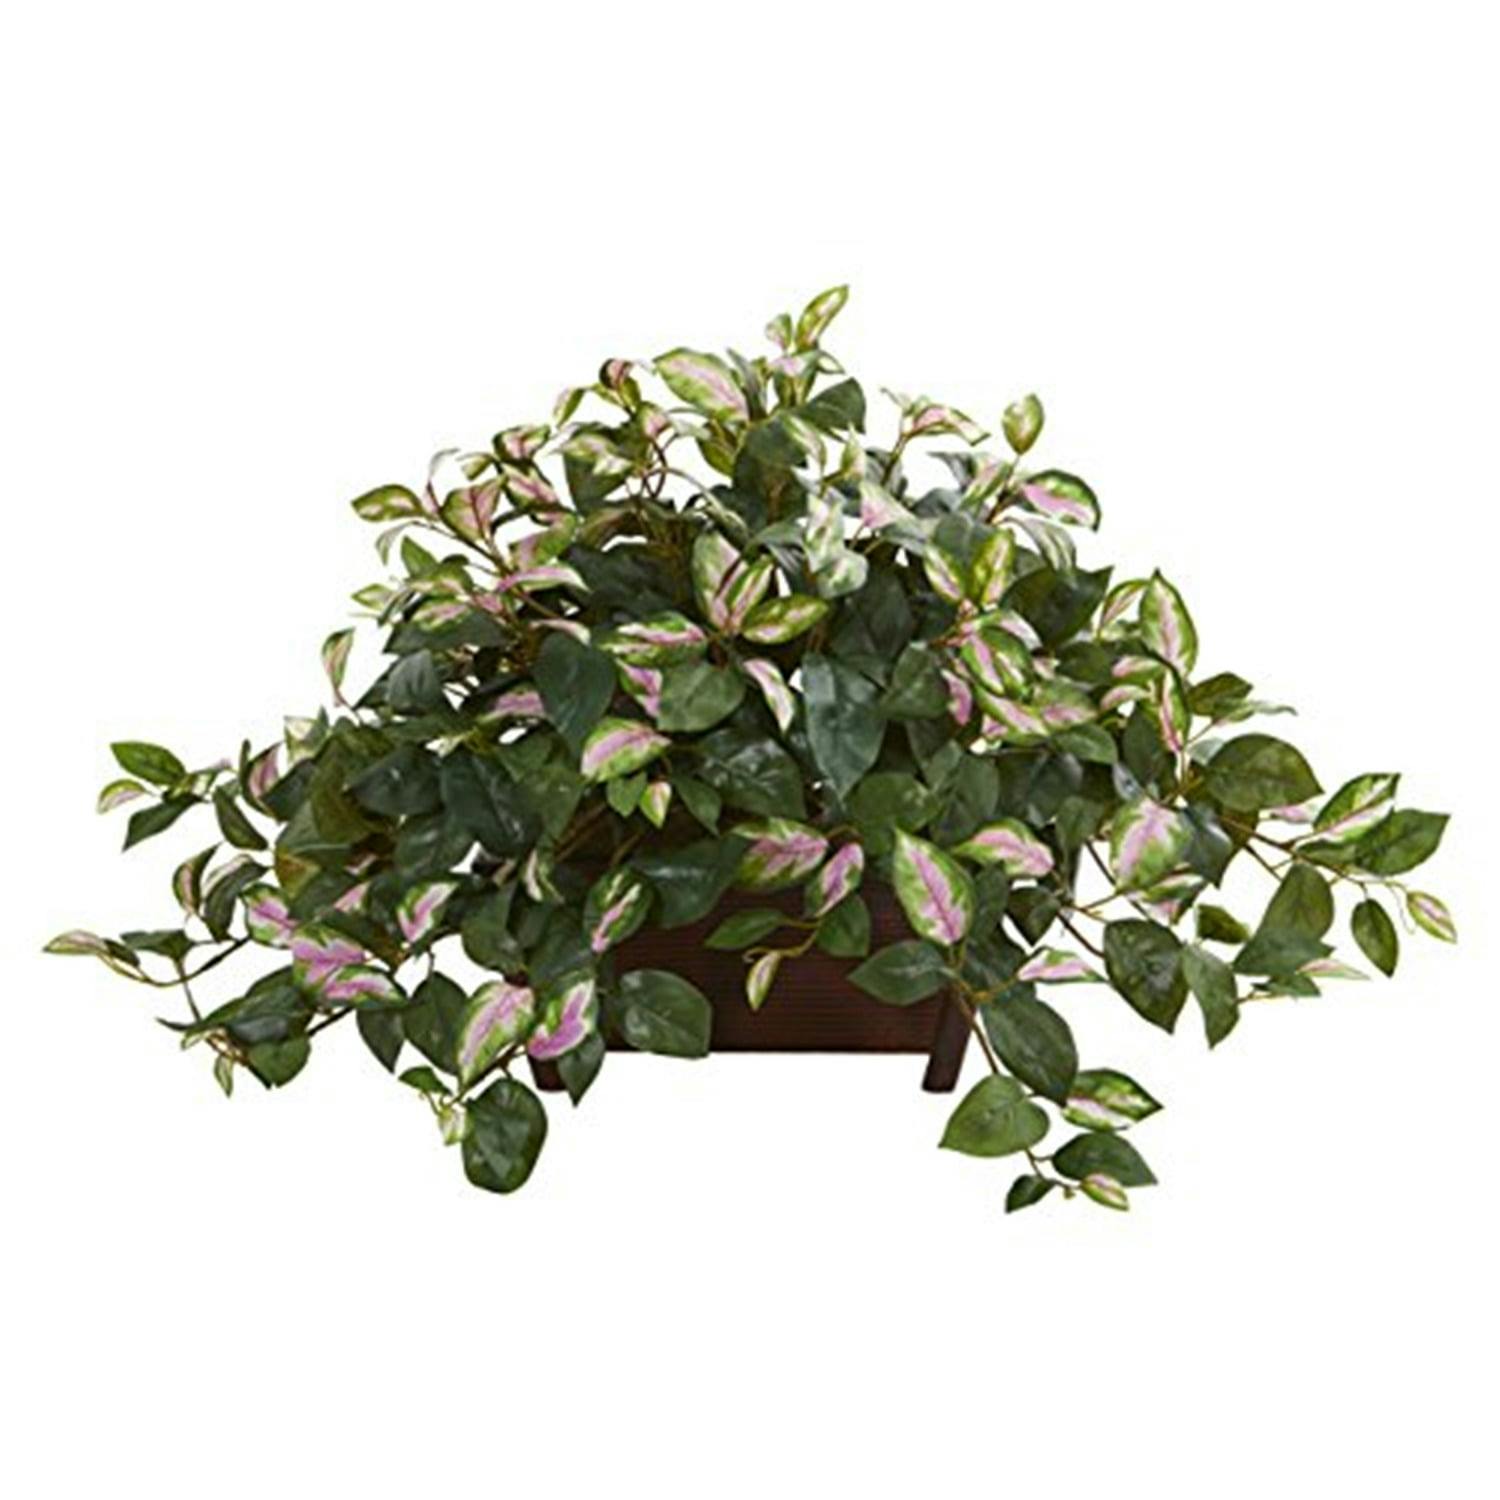 Lush Variegated Green and Purple 14" Hoya Artificial Plant